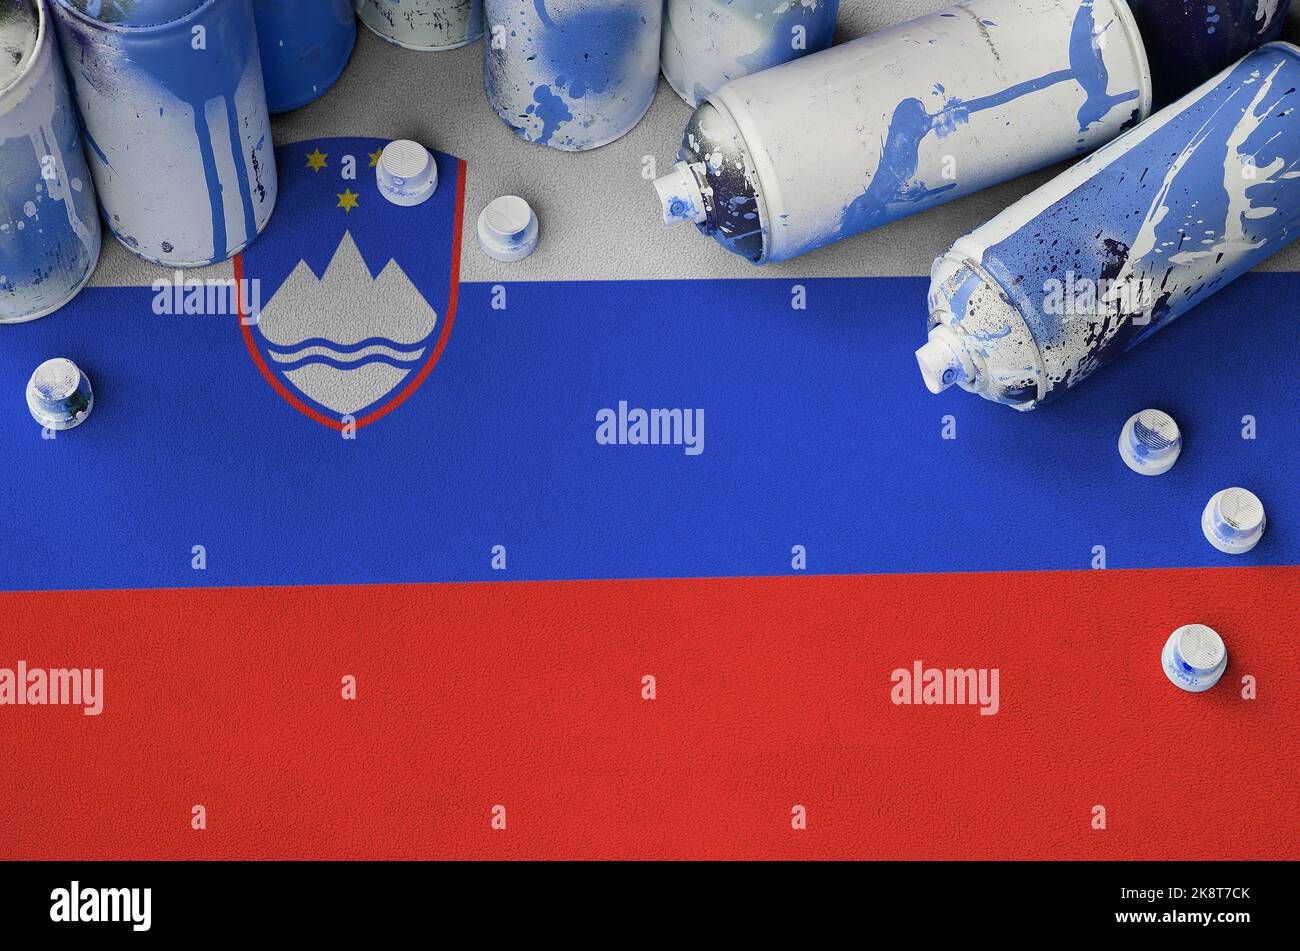 Slovenia flag and few used aerosol spray cans for graffiti painting. Street art culture concept, vandalism problems Stock Photo